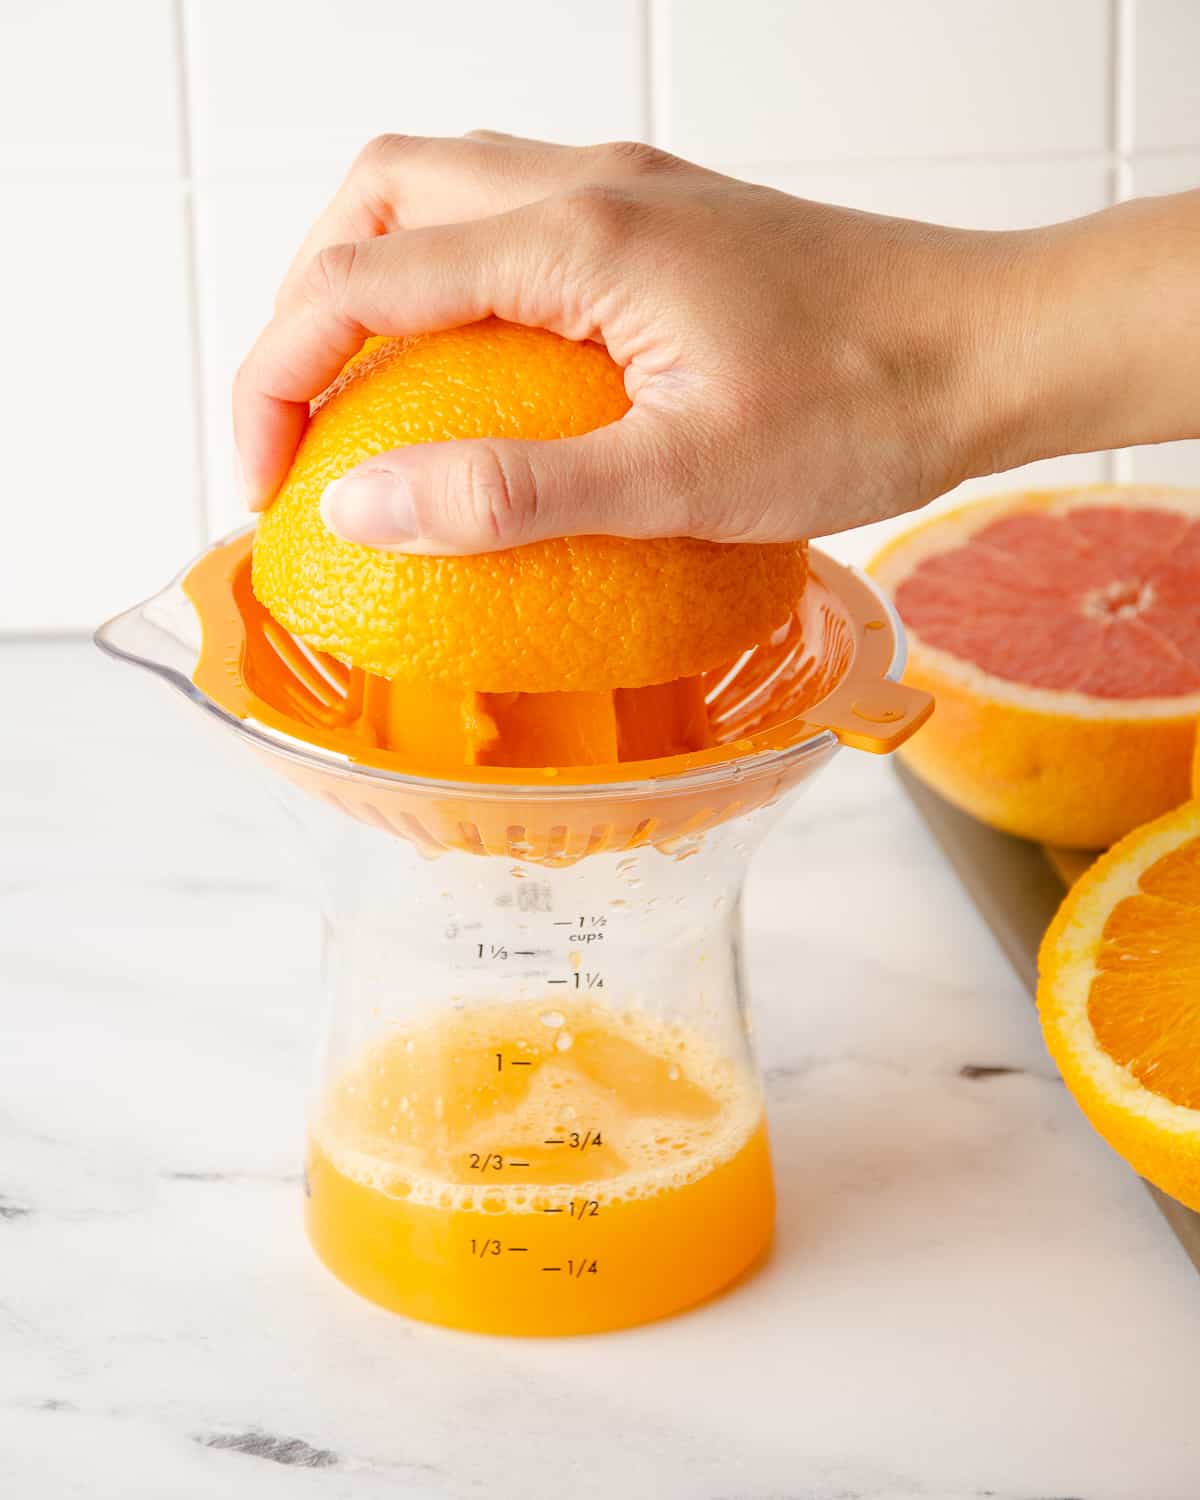 A hand squeezing an orange half on a juicer.